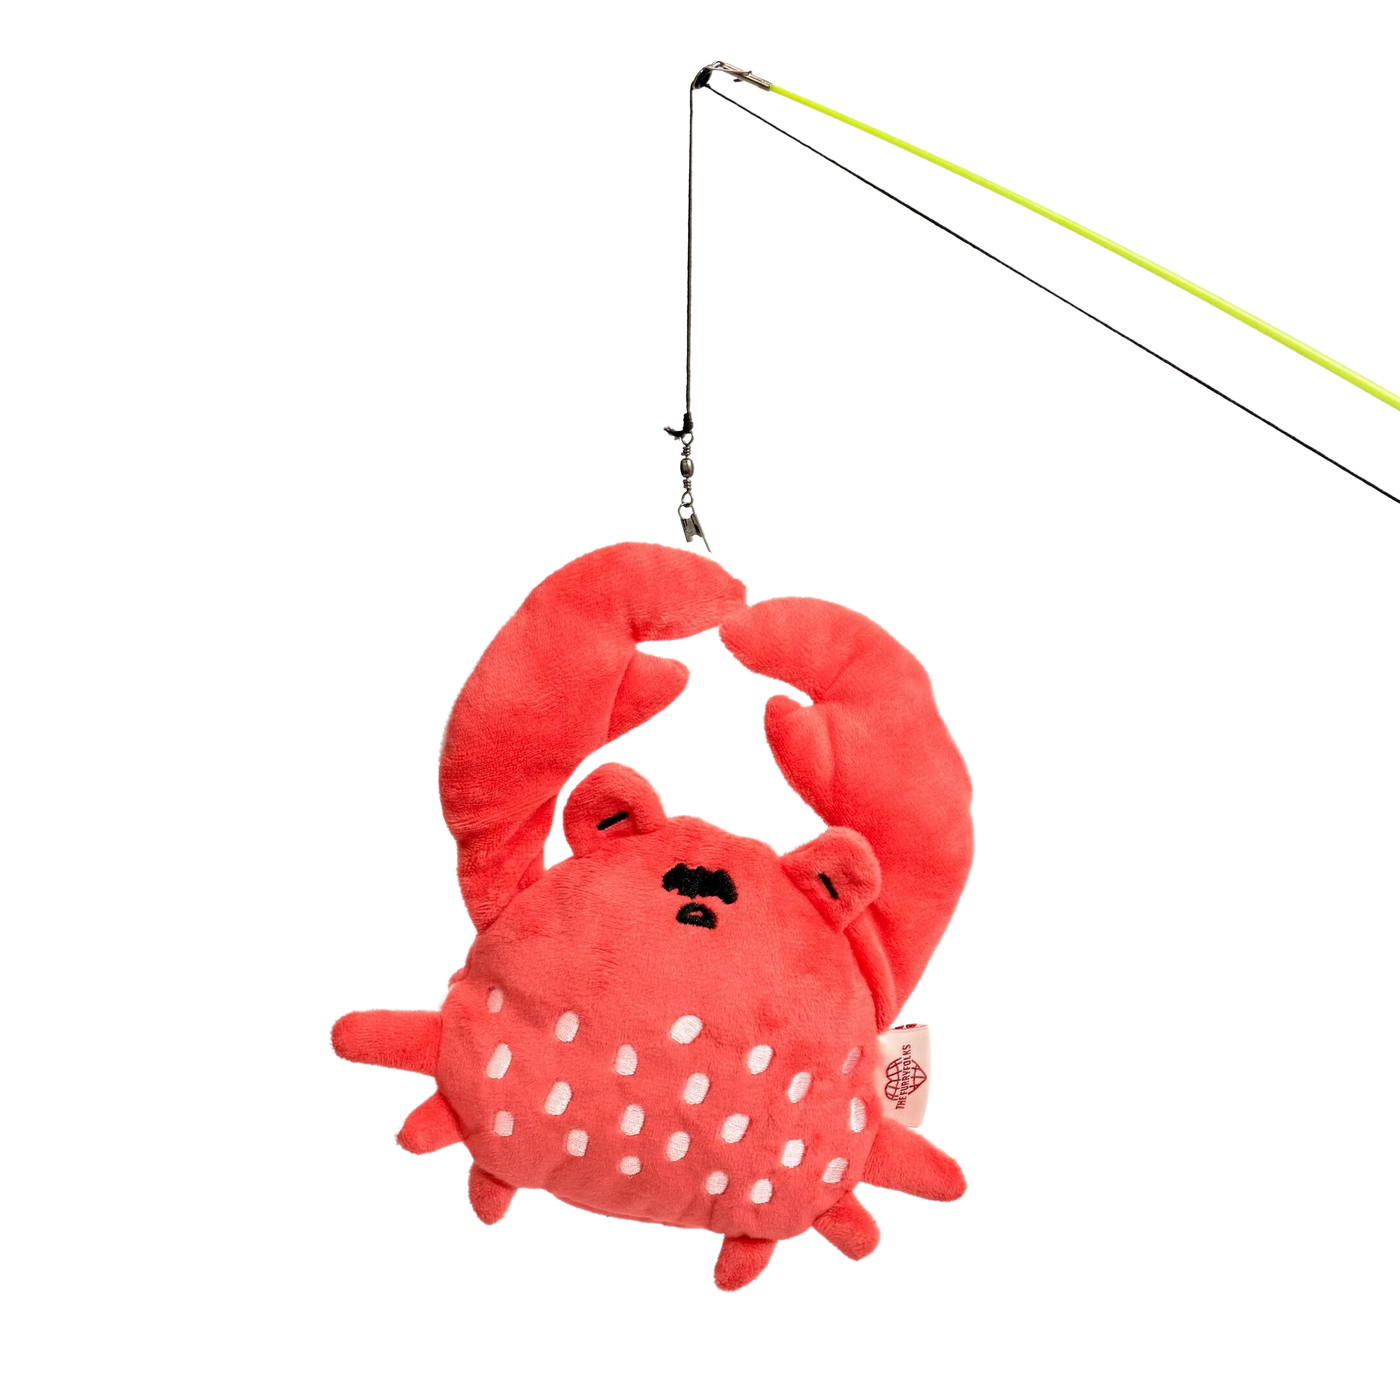 Uncle Crab Nosework Toy